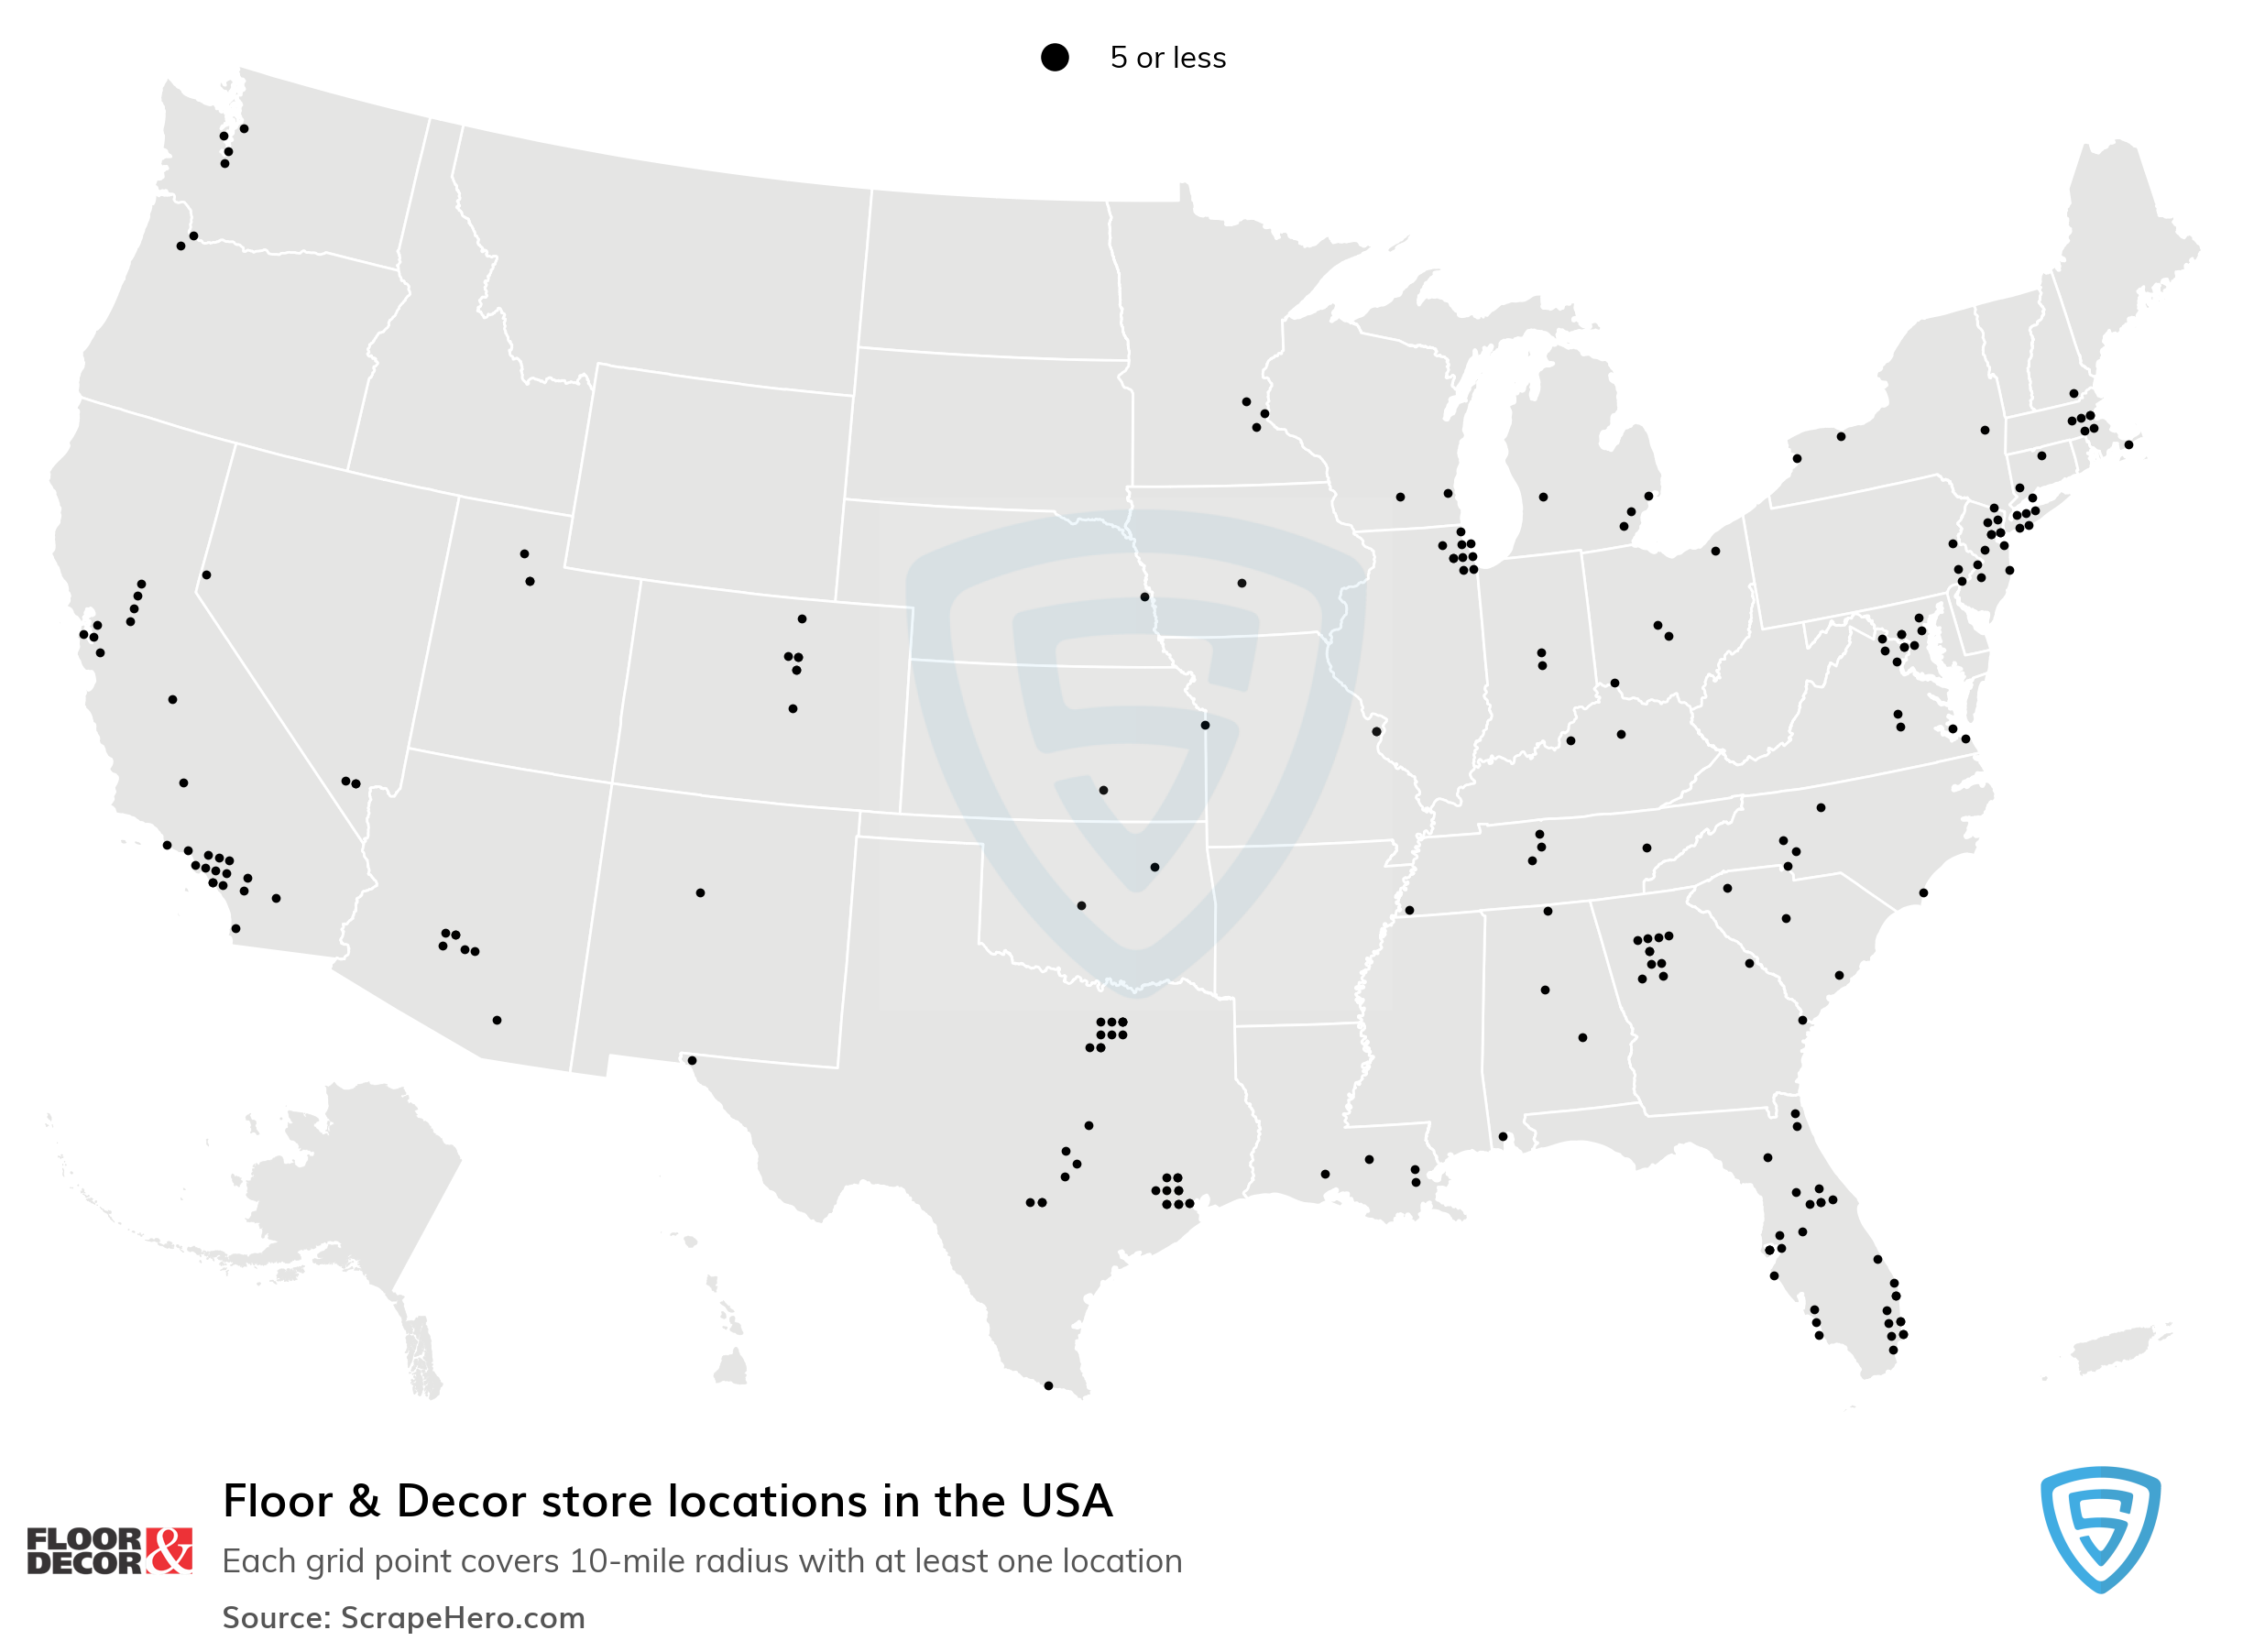 Number of Floor & Decor locations in the United States in 2022 | ScrapeHero